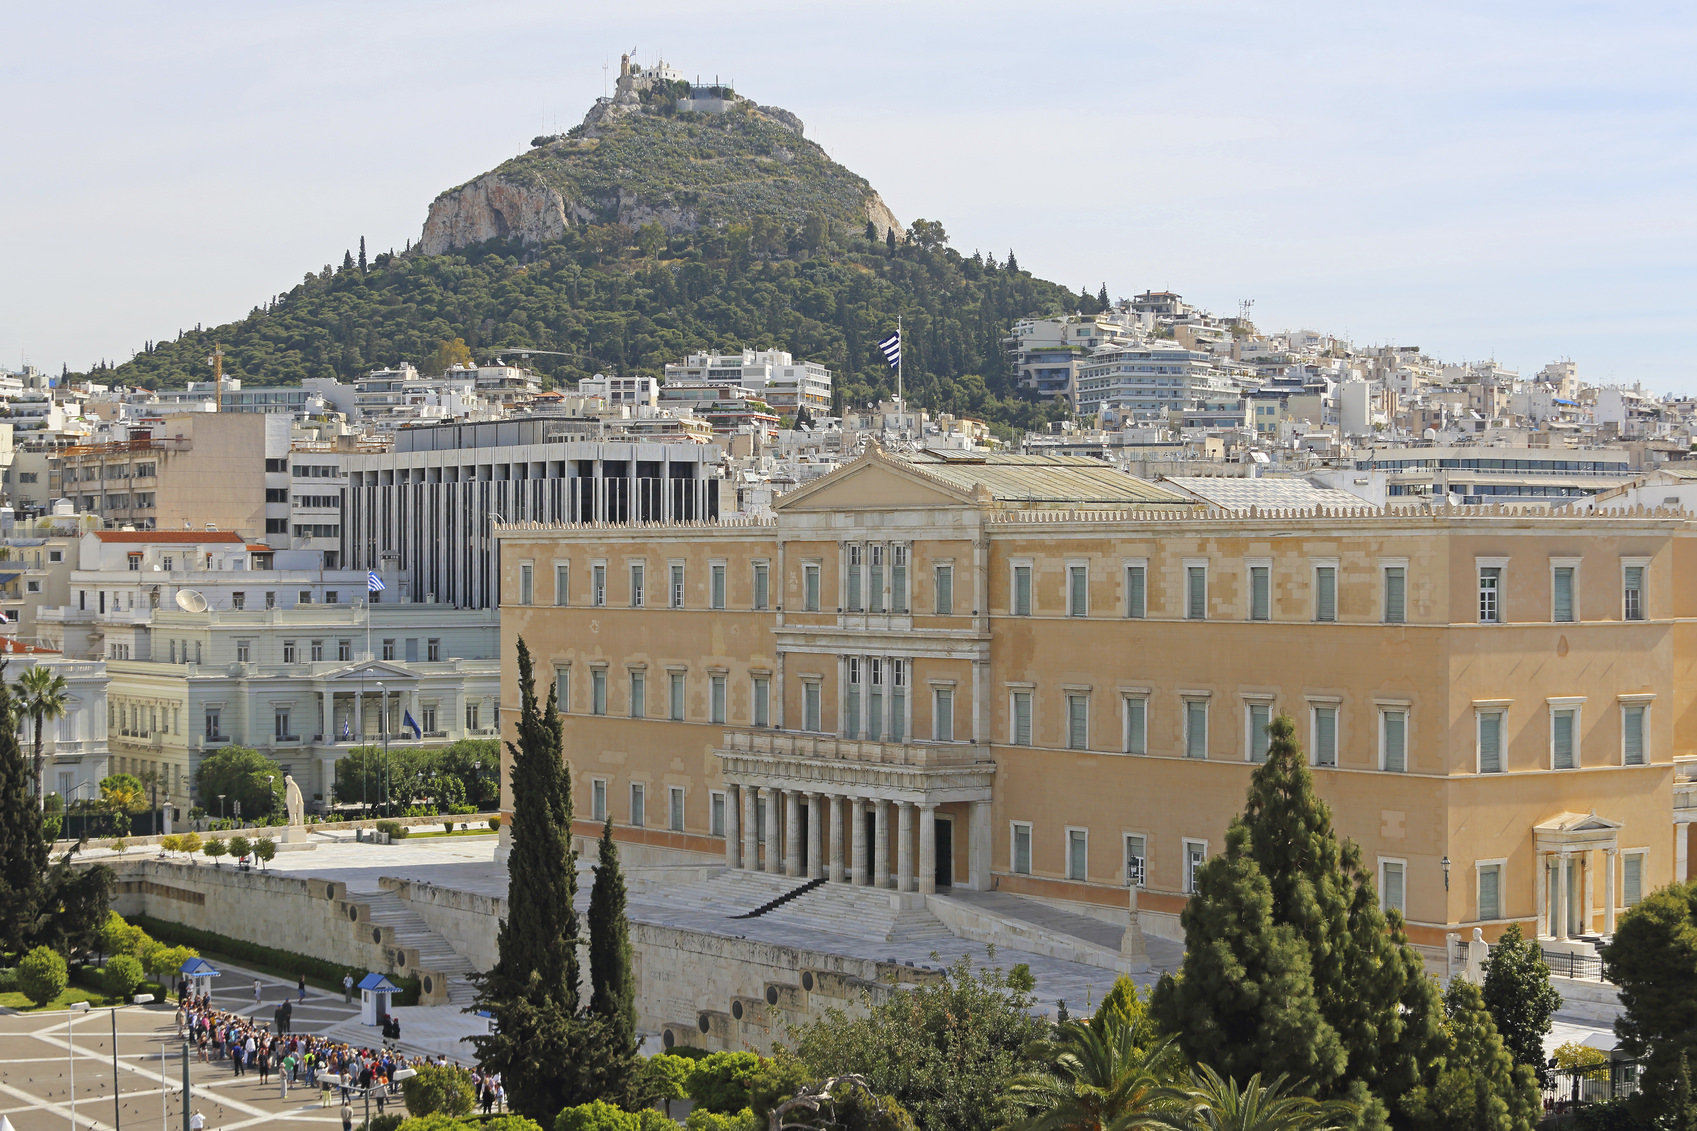 Athens, Greece - May 02, 2015: Tourists in front of Greek Parliament and Mount Lycabettus in Athens, Greece.